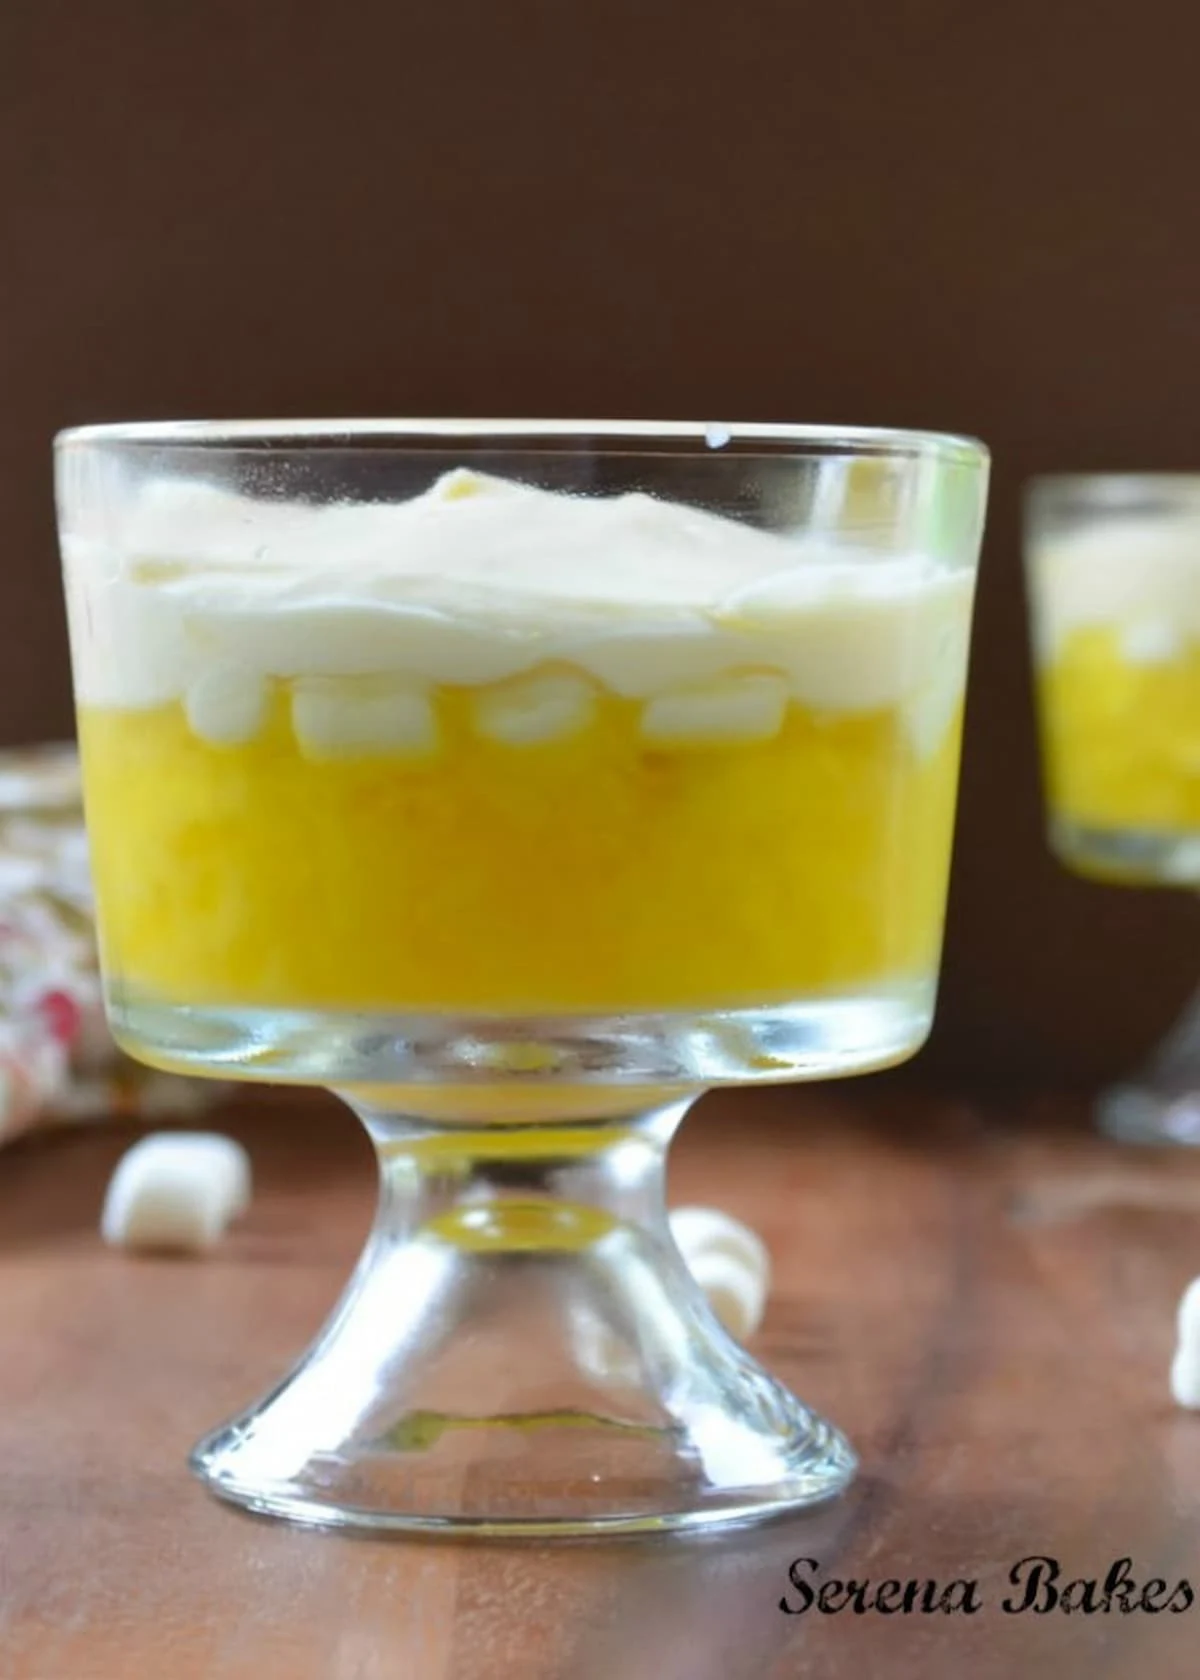 7 Up Lemon Jello Salad in a parfait cup. Layers of 7 Up Lemon Jello with Pineapple and Banana topped with Marshmallows and a Pineapple Mousse. A delicious Jello Salad Recipe.